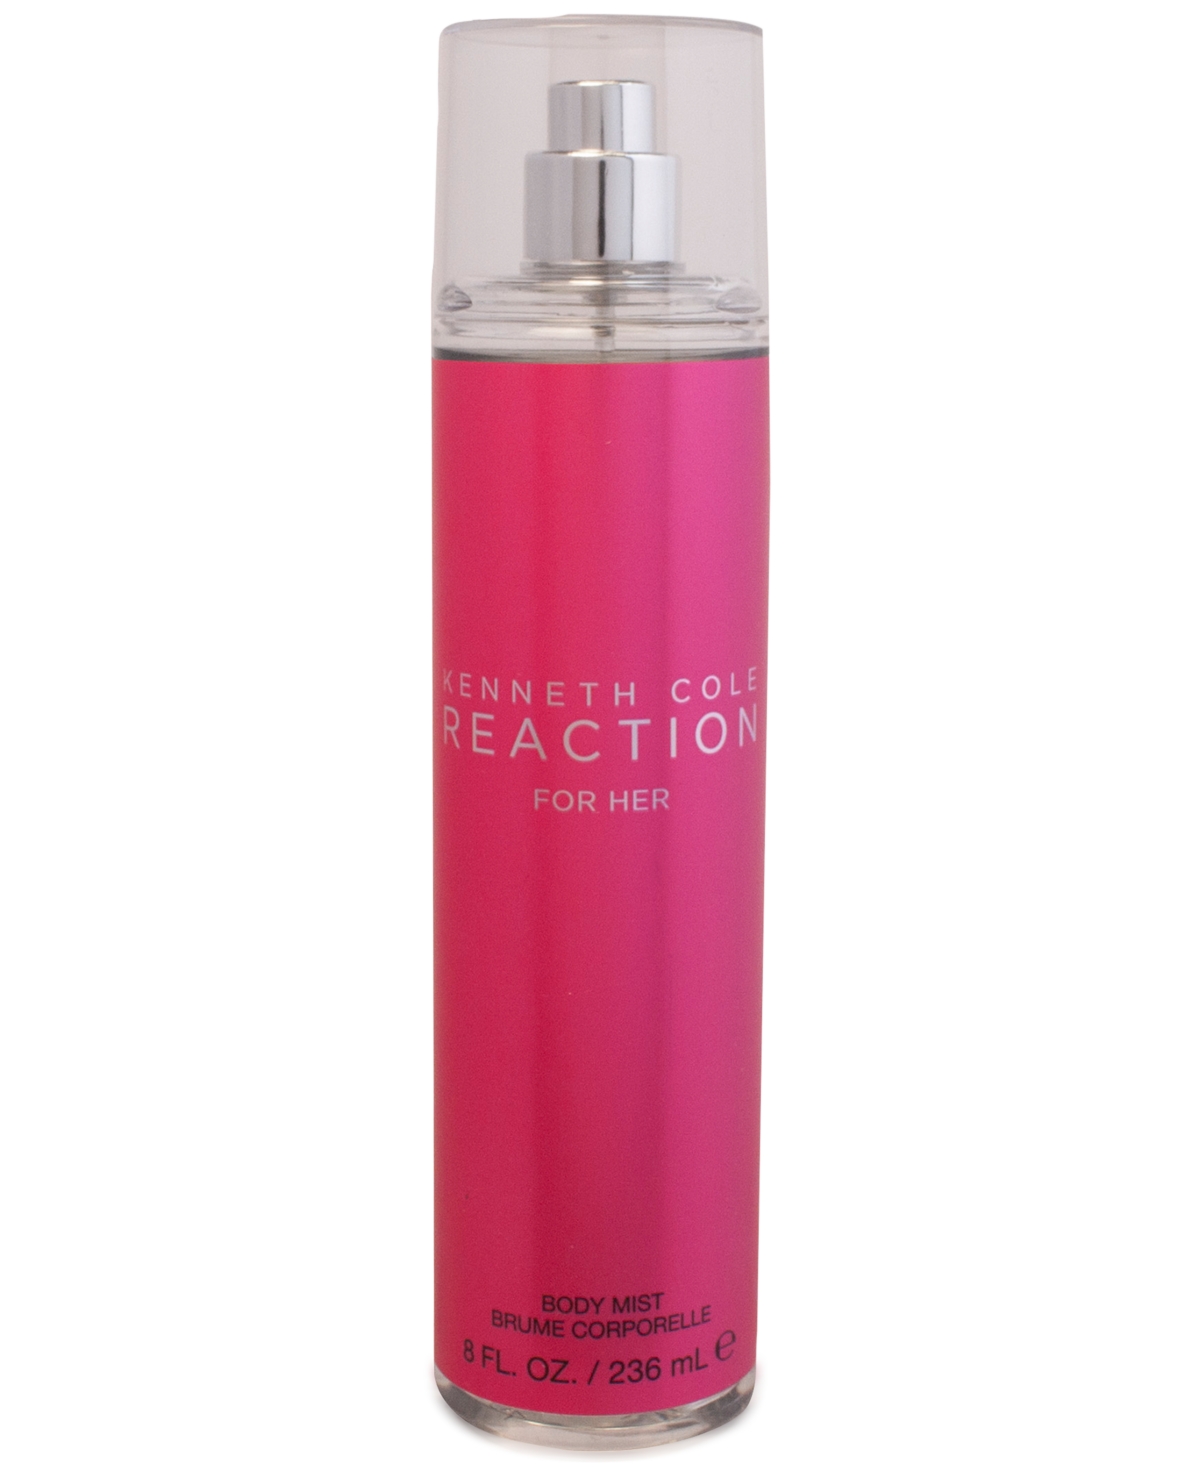 Kenneth Cole Reaction For Her Body Mist, 8 Oz.